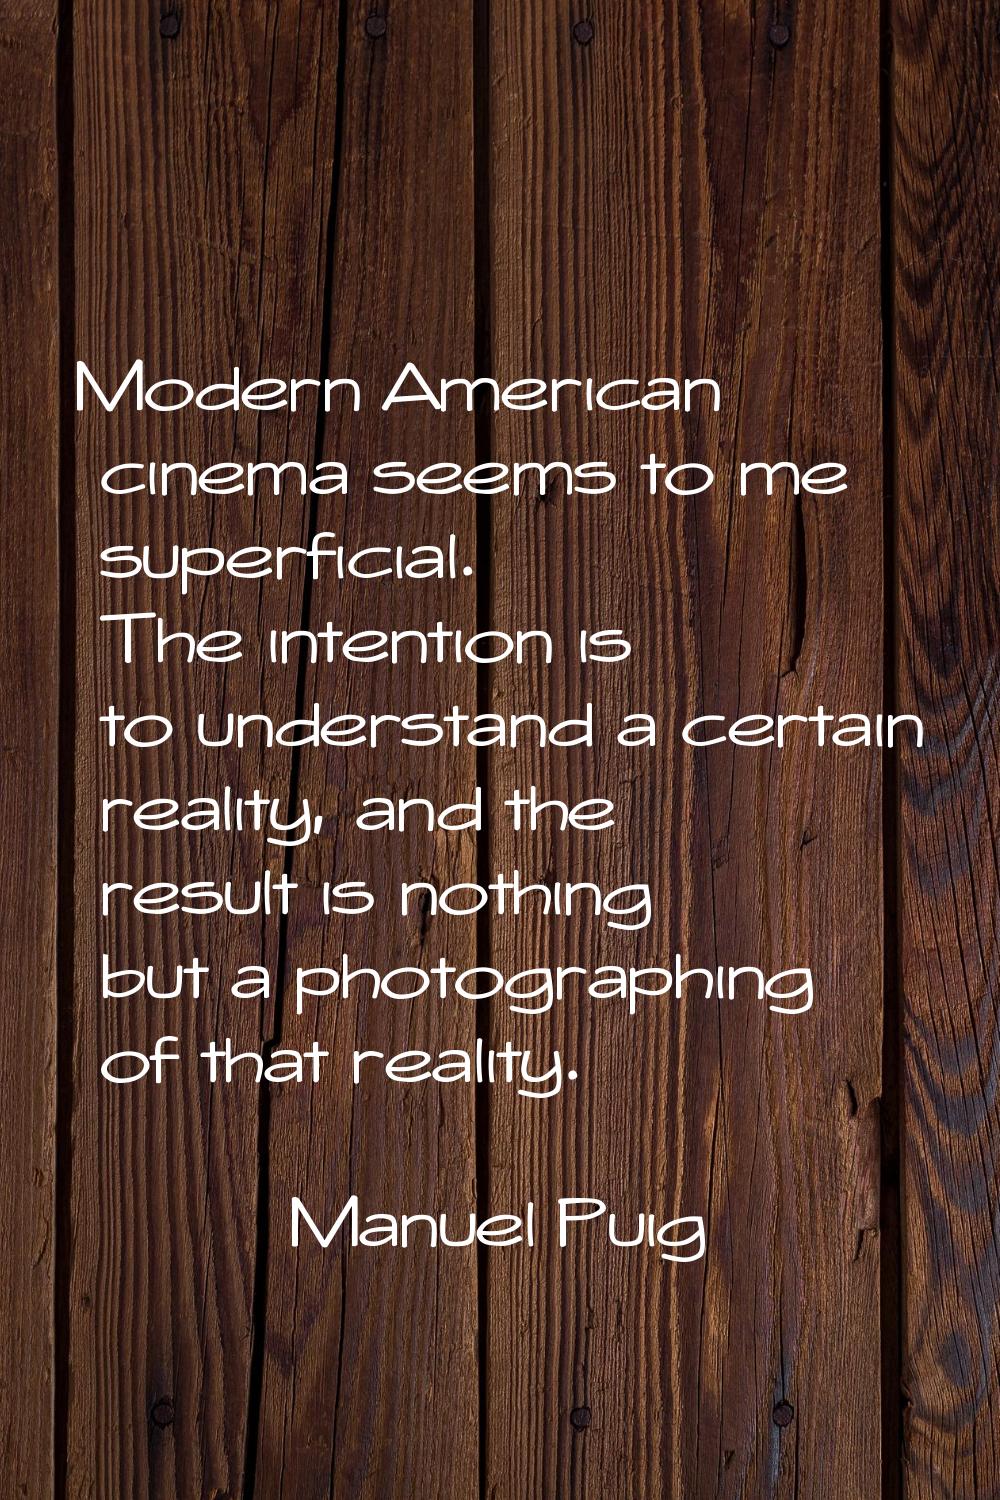 Modern American cinema seems to me superficial. The intention is to understand a certain reality, a